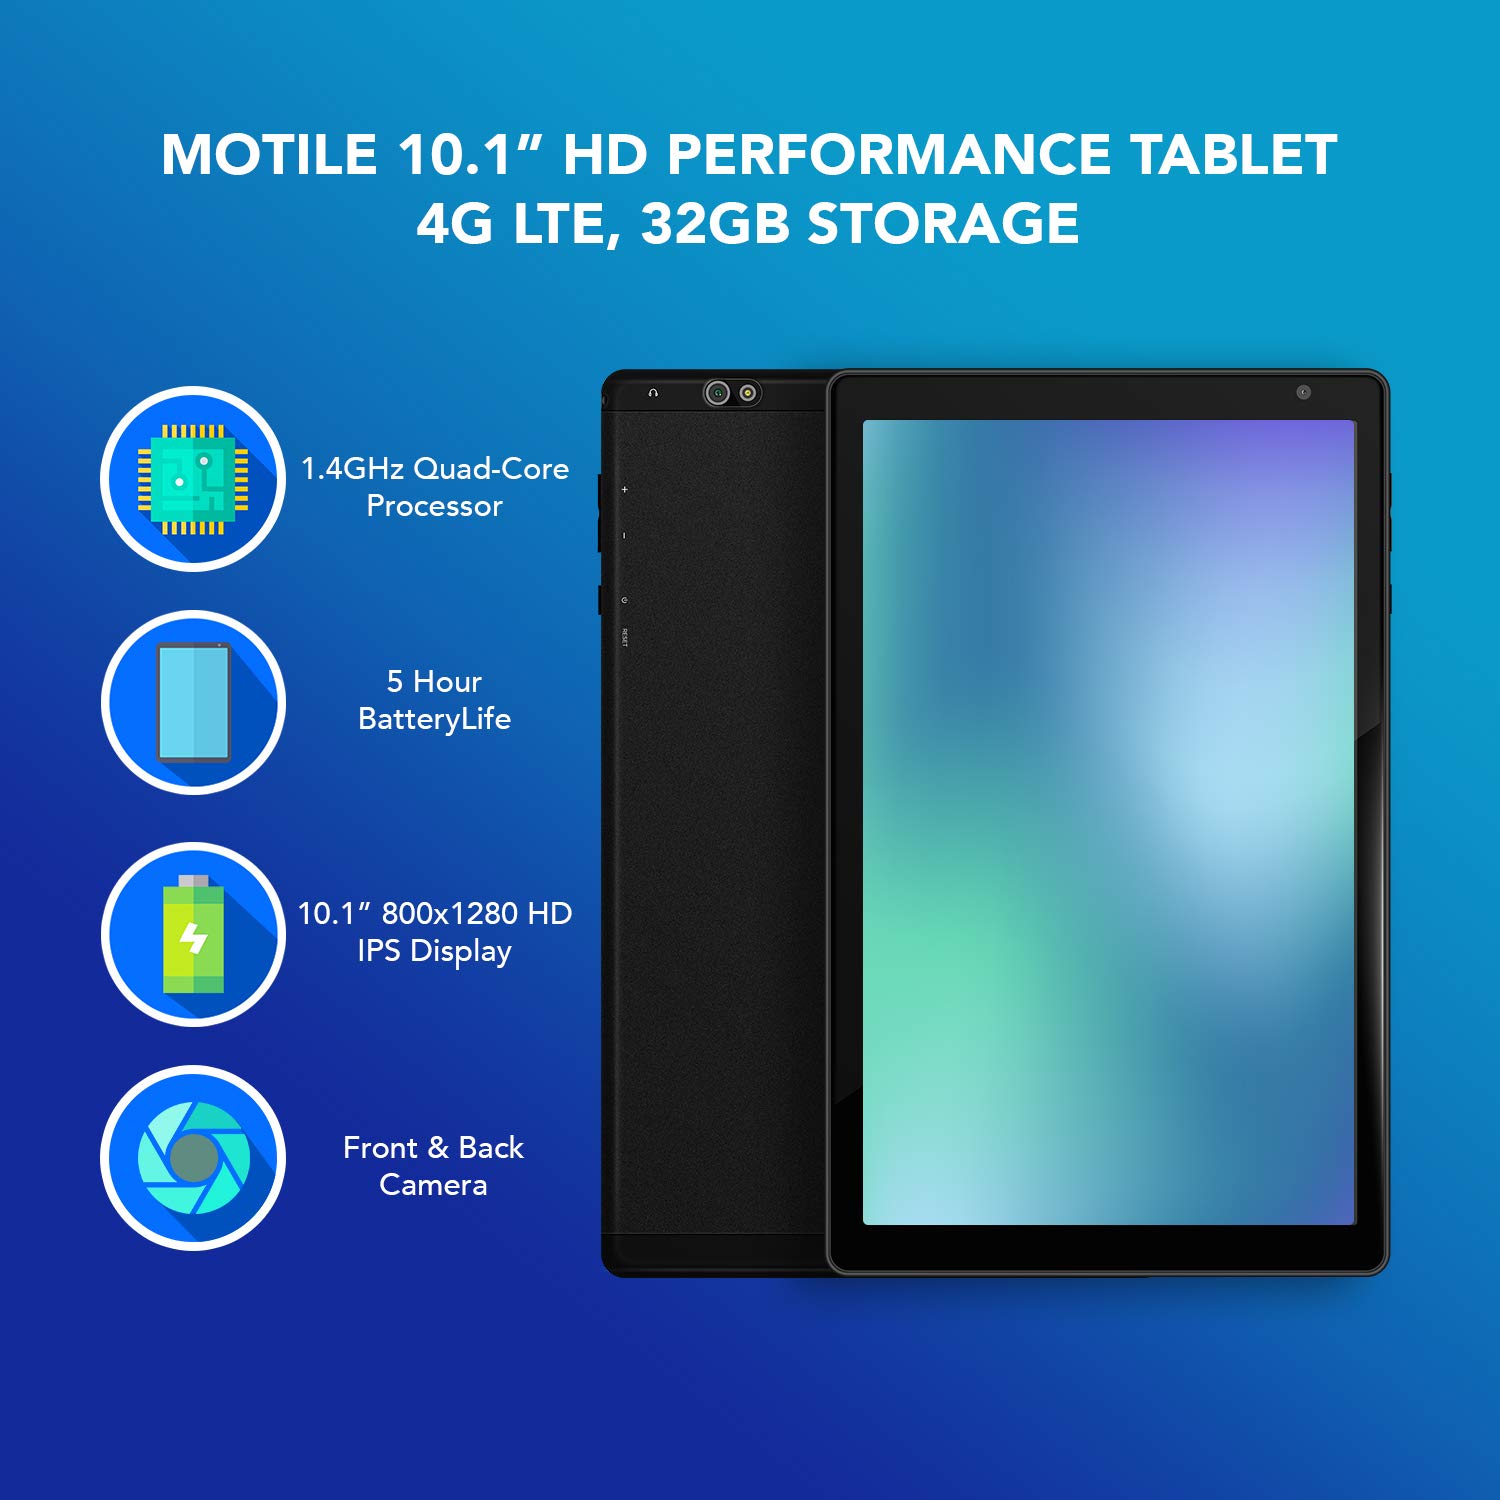 MOTILE 10.1” IPS Touch Screen HD Performance Big Android Tablet, 4G LTE/3G/2G, WiFi, Bluetooth, 32GB Storage, Black